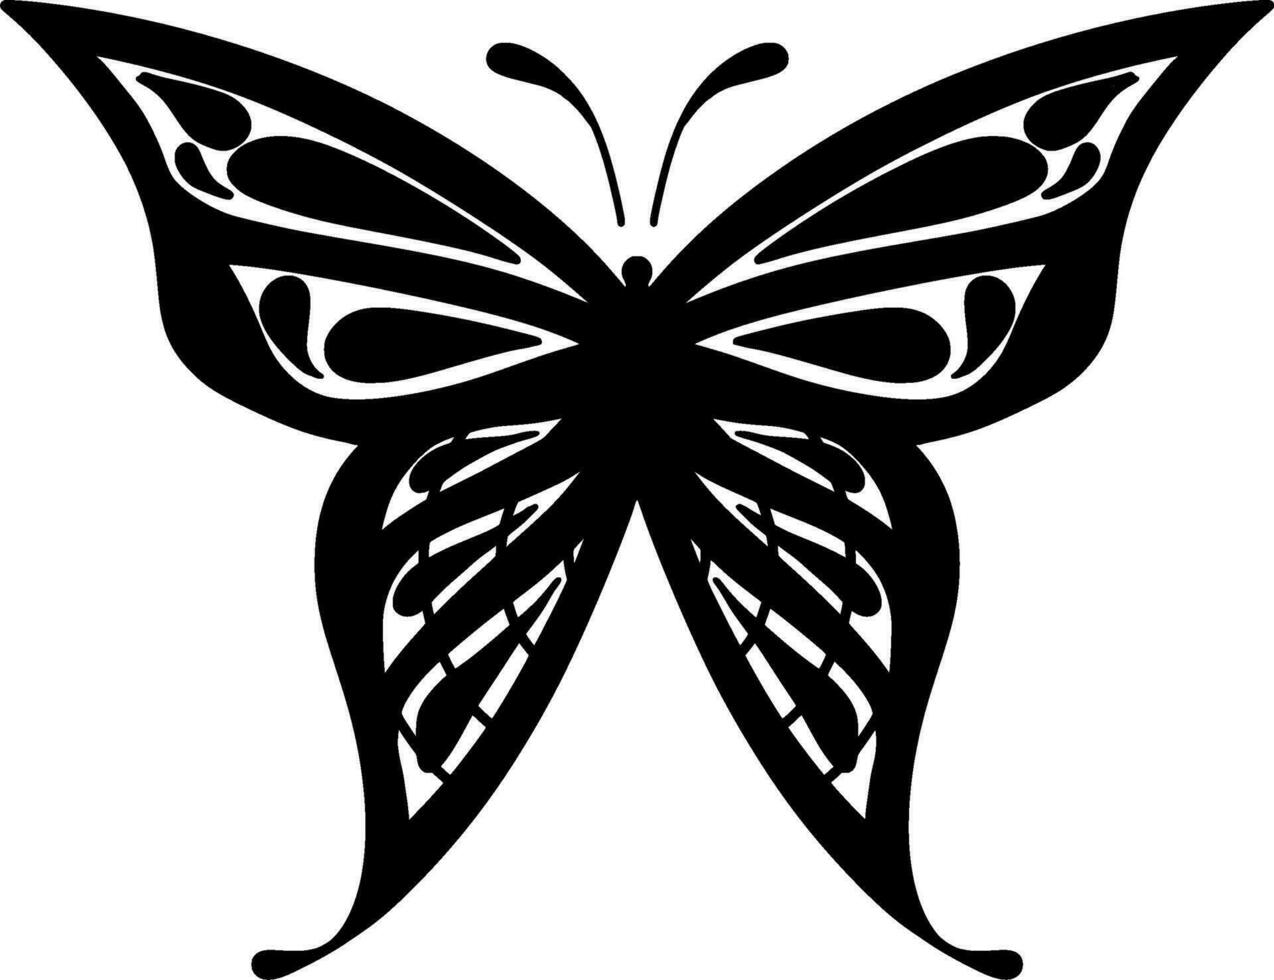 Monochrome ethnic butterfly design. Anti-stress coloring page for adults. Hand drawn black and white vector illustration